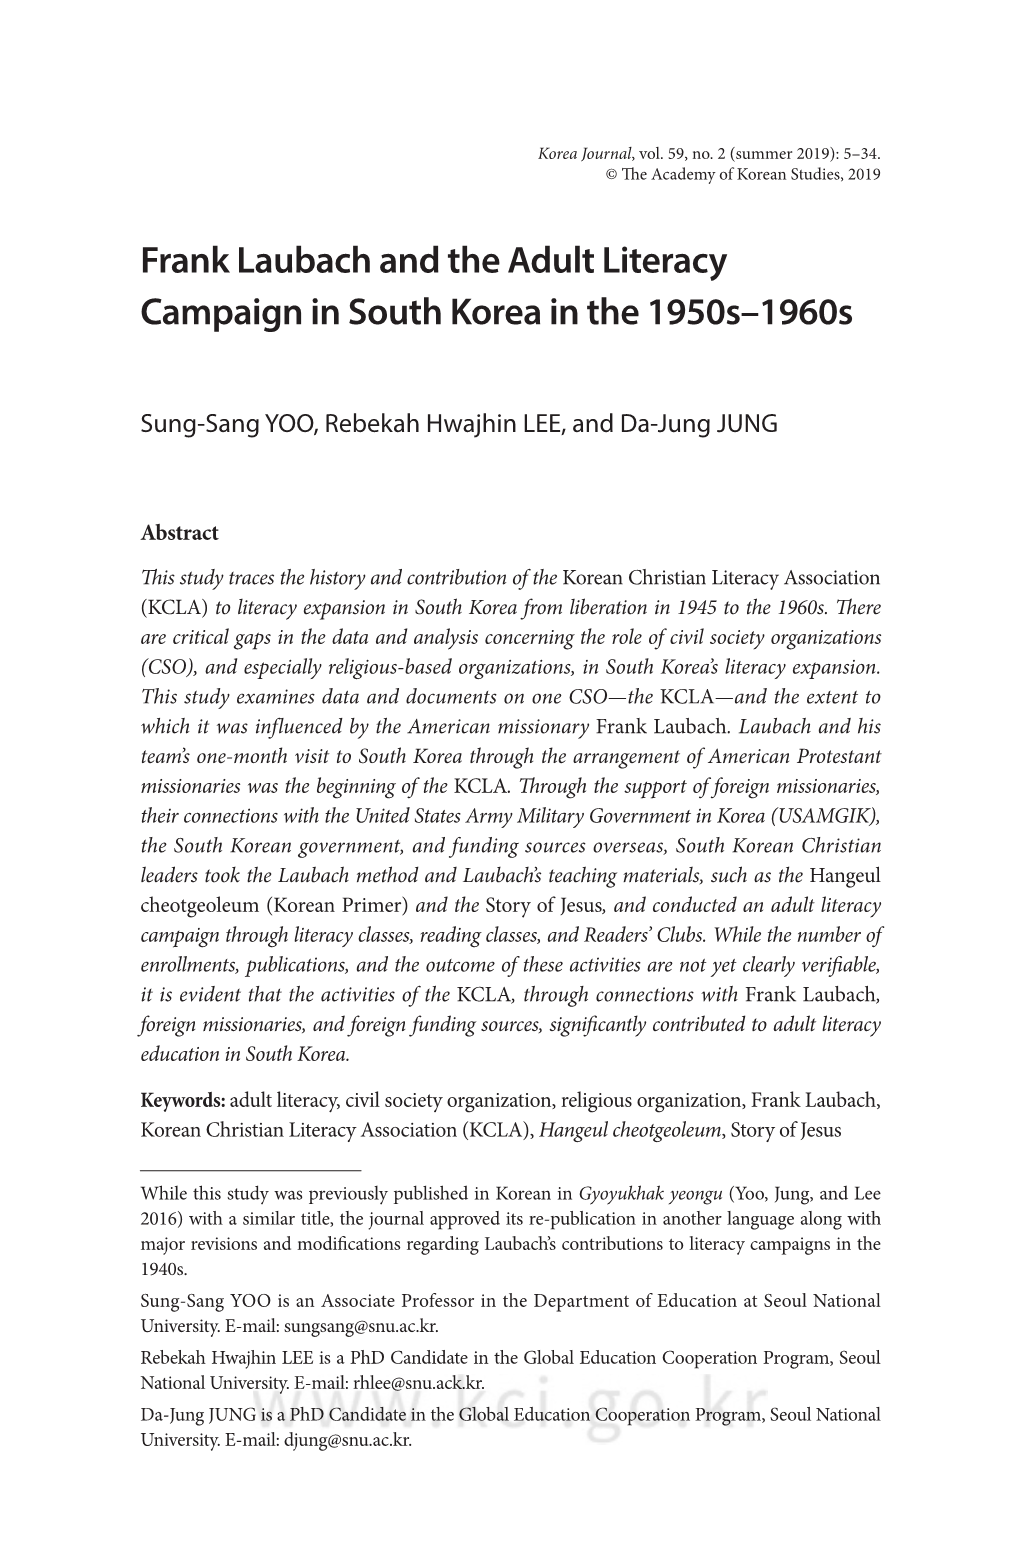 Frank Laubach and the Adult Literacy Campaign in South Korea in the 1950S–1960S